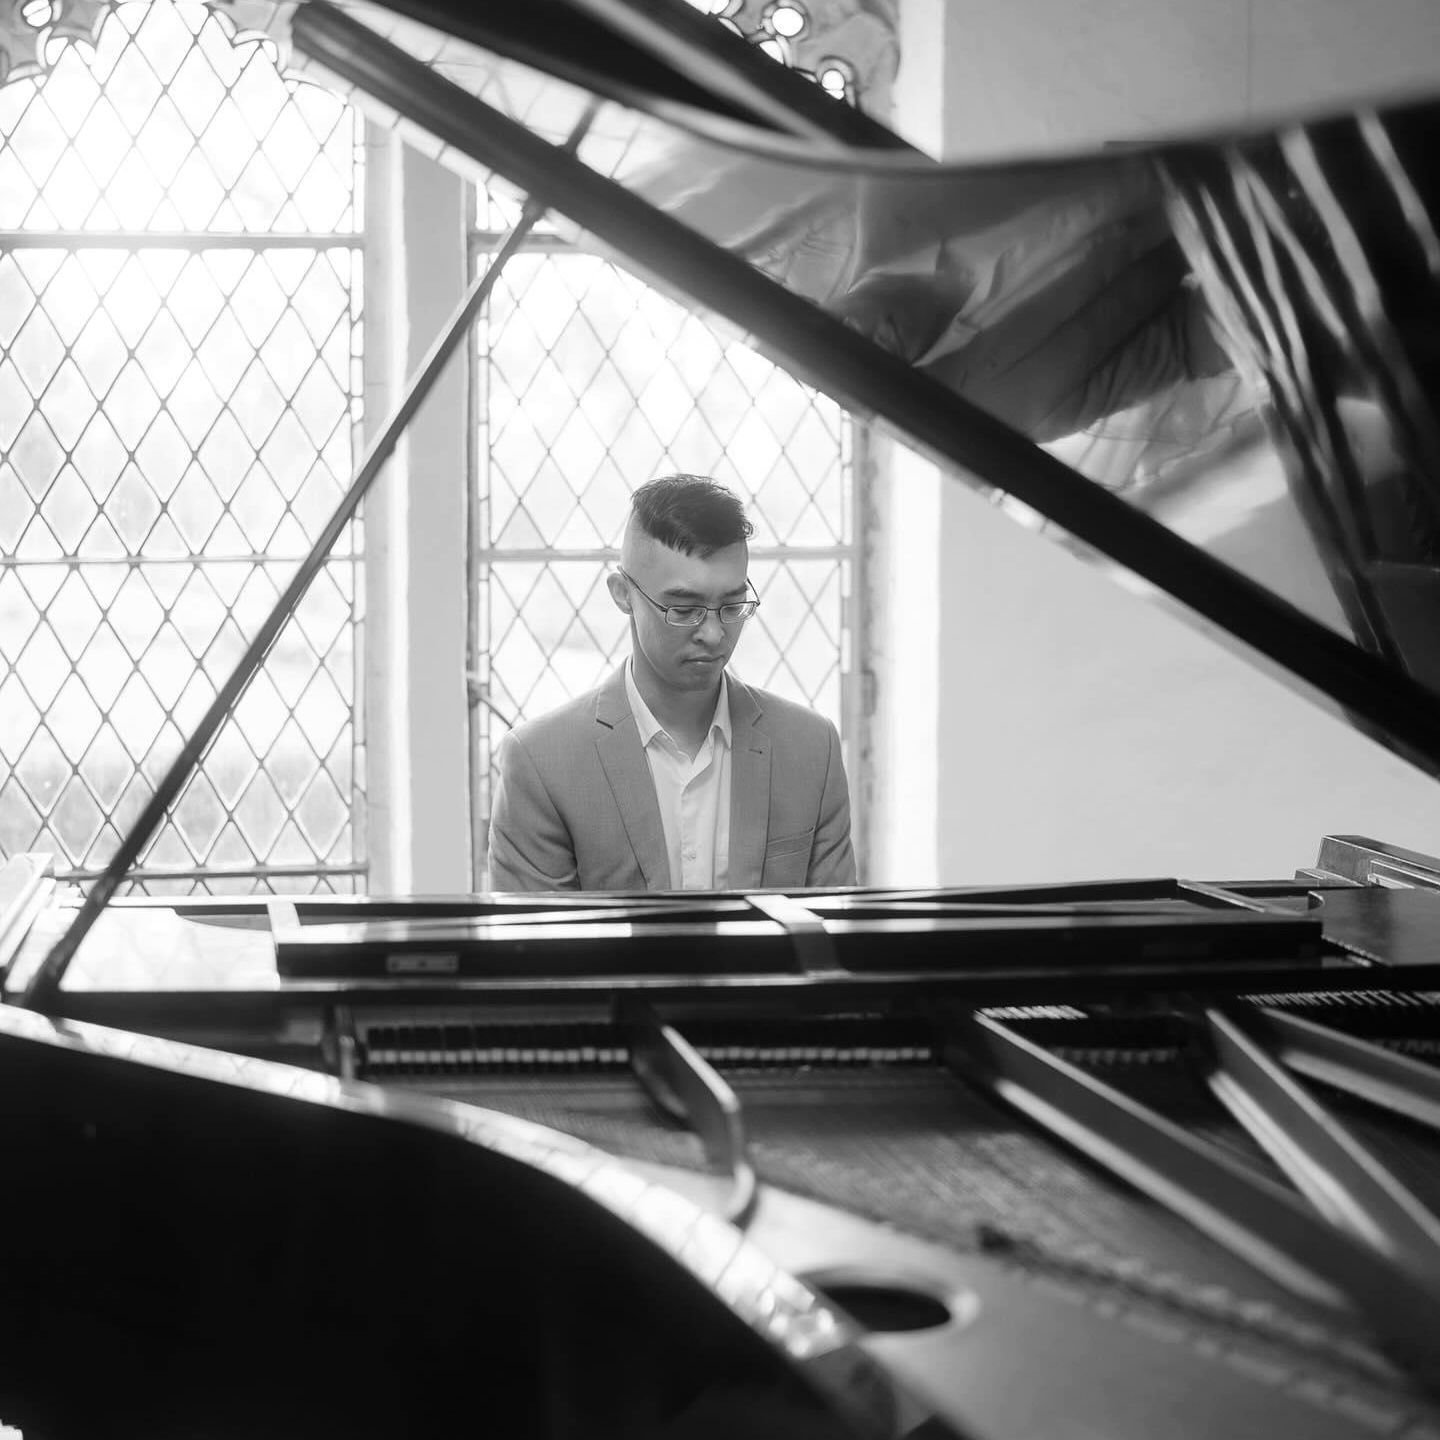 Thanks @nikolajanev for the action shot of me on the piano @montsalvatweddings a few weeks ago.

Need a photographer 📸 for your wedding then 💯 don't look past @nikolajanev. He is your man!!

Need a pianist 🎹 for your wedding then 💯 don't look pas